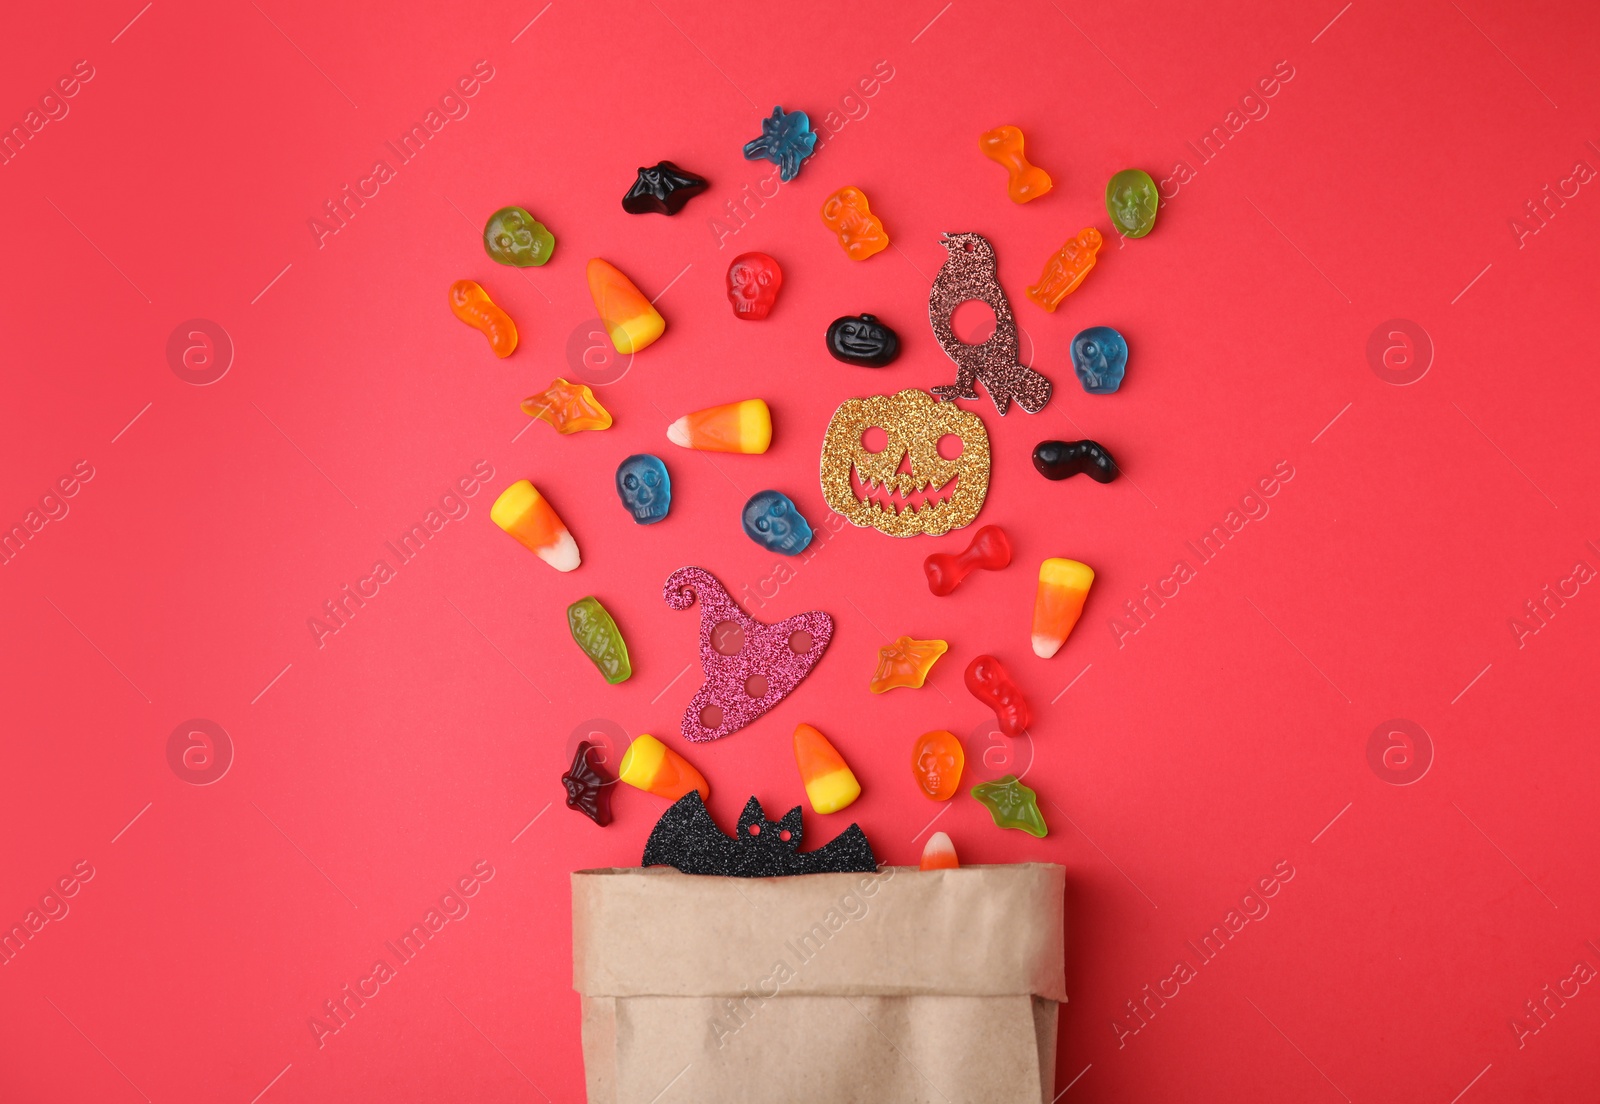 Photo of Paper bag of tasty candies and Halloween decorations on red background, flat lay